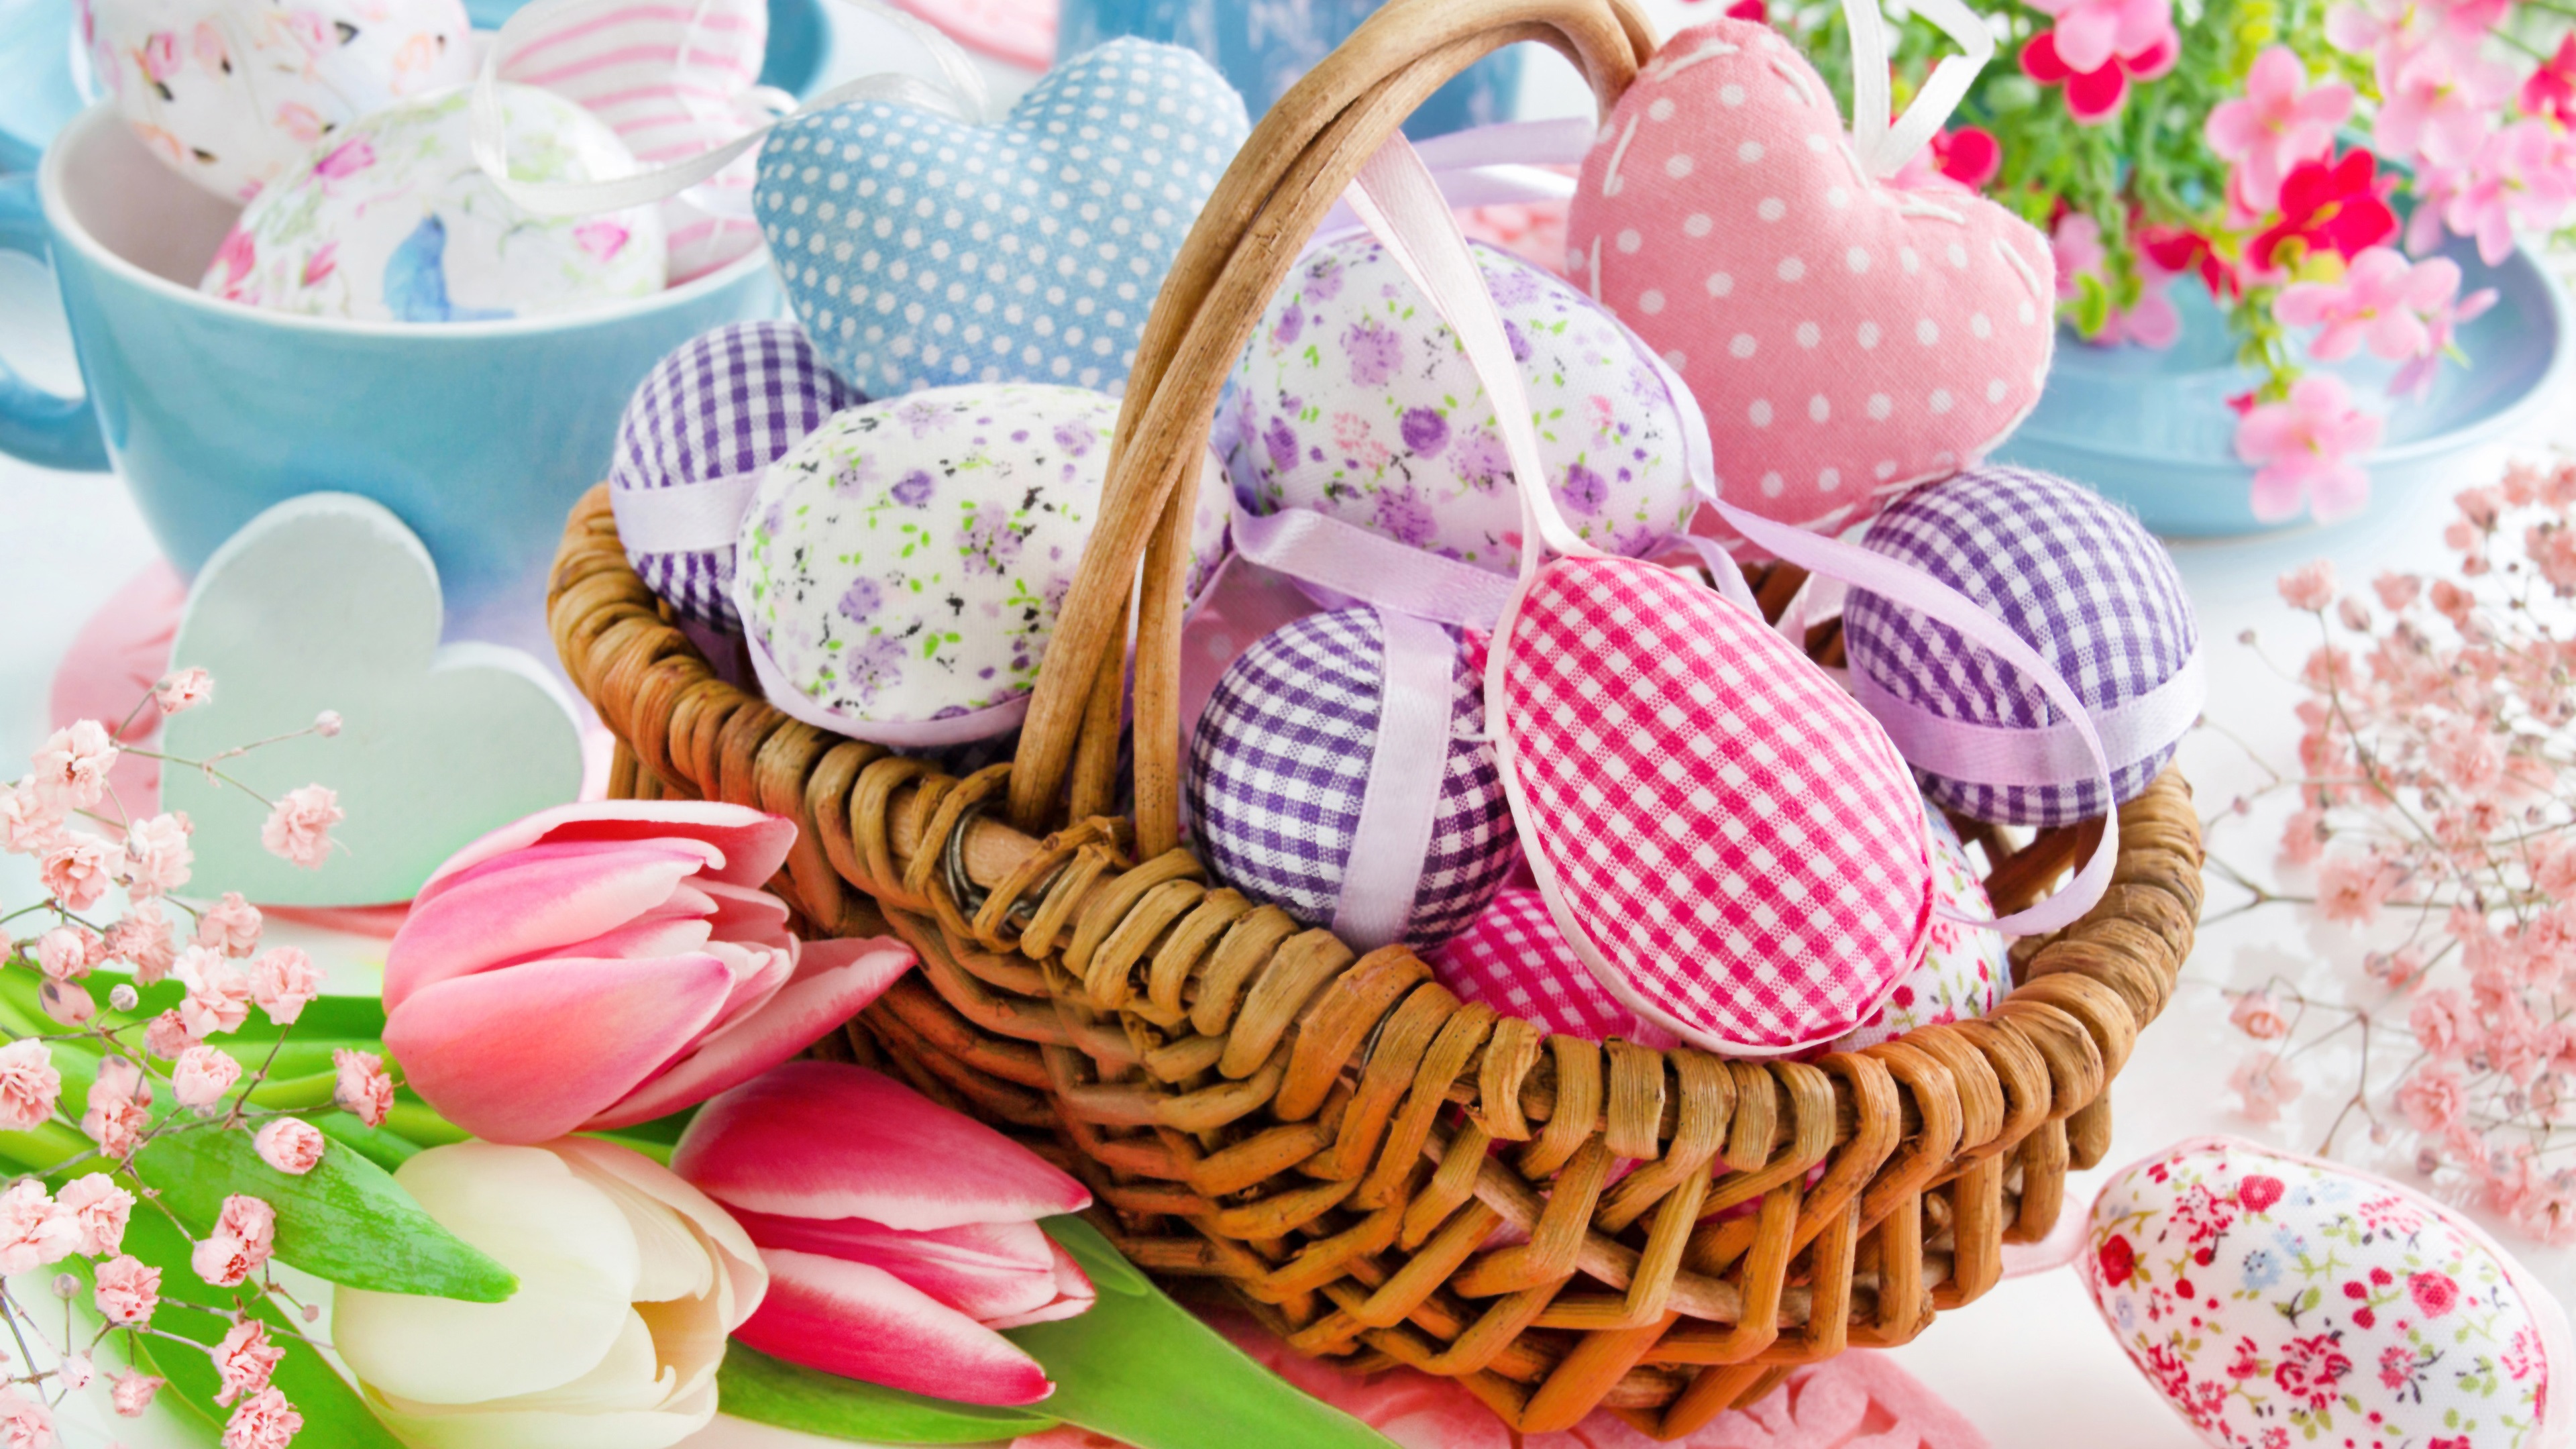 Wallpaper Tulips, colorful eggs, cloth, basket, Happy Easter 3840x2160 UHD 4K Picture, Image